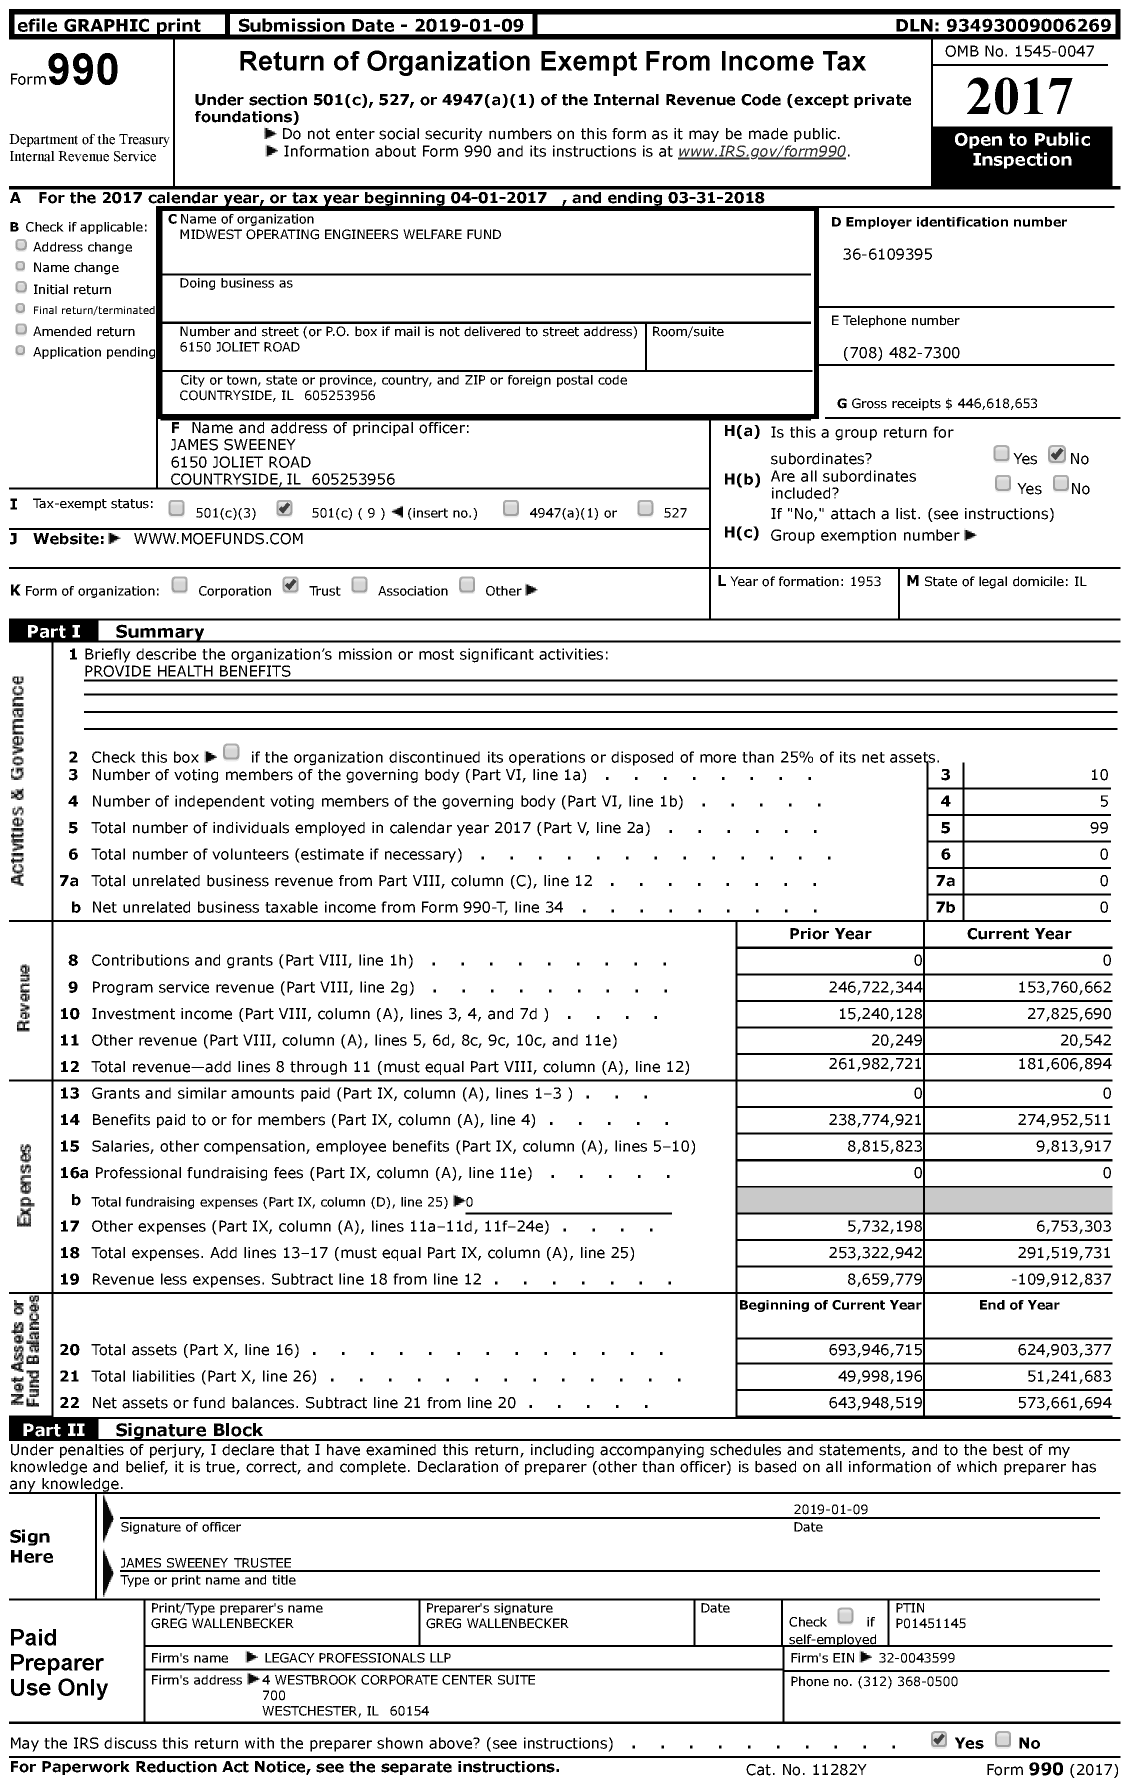 Image of first page of 2017 Form 990 for Midwest Operating Engineers Welfare Fund